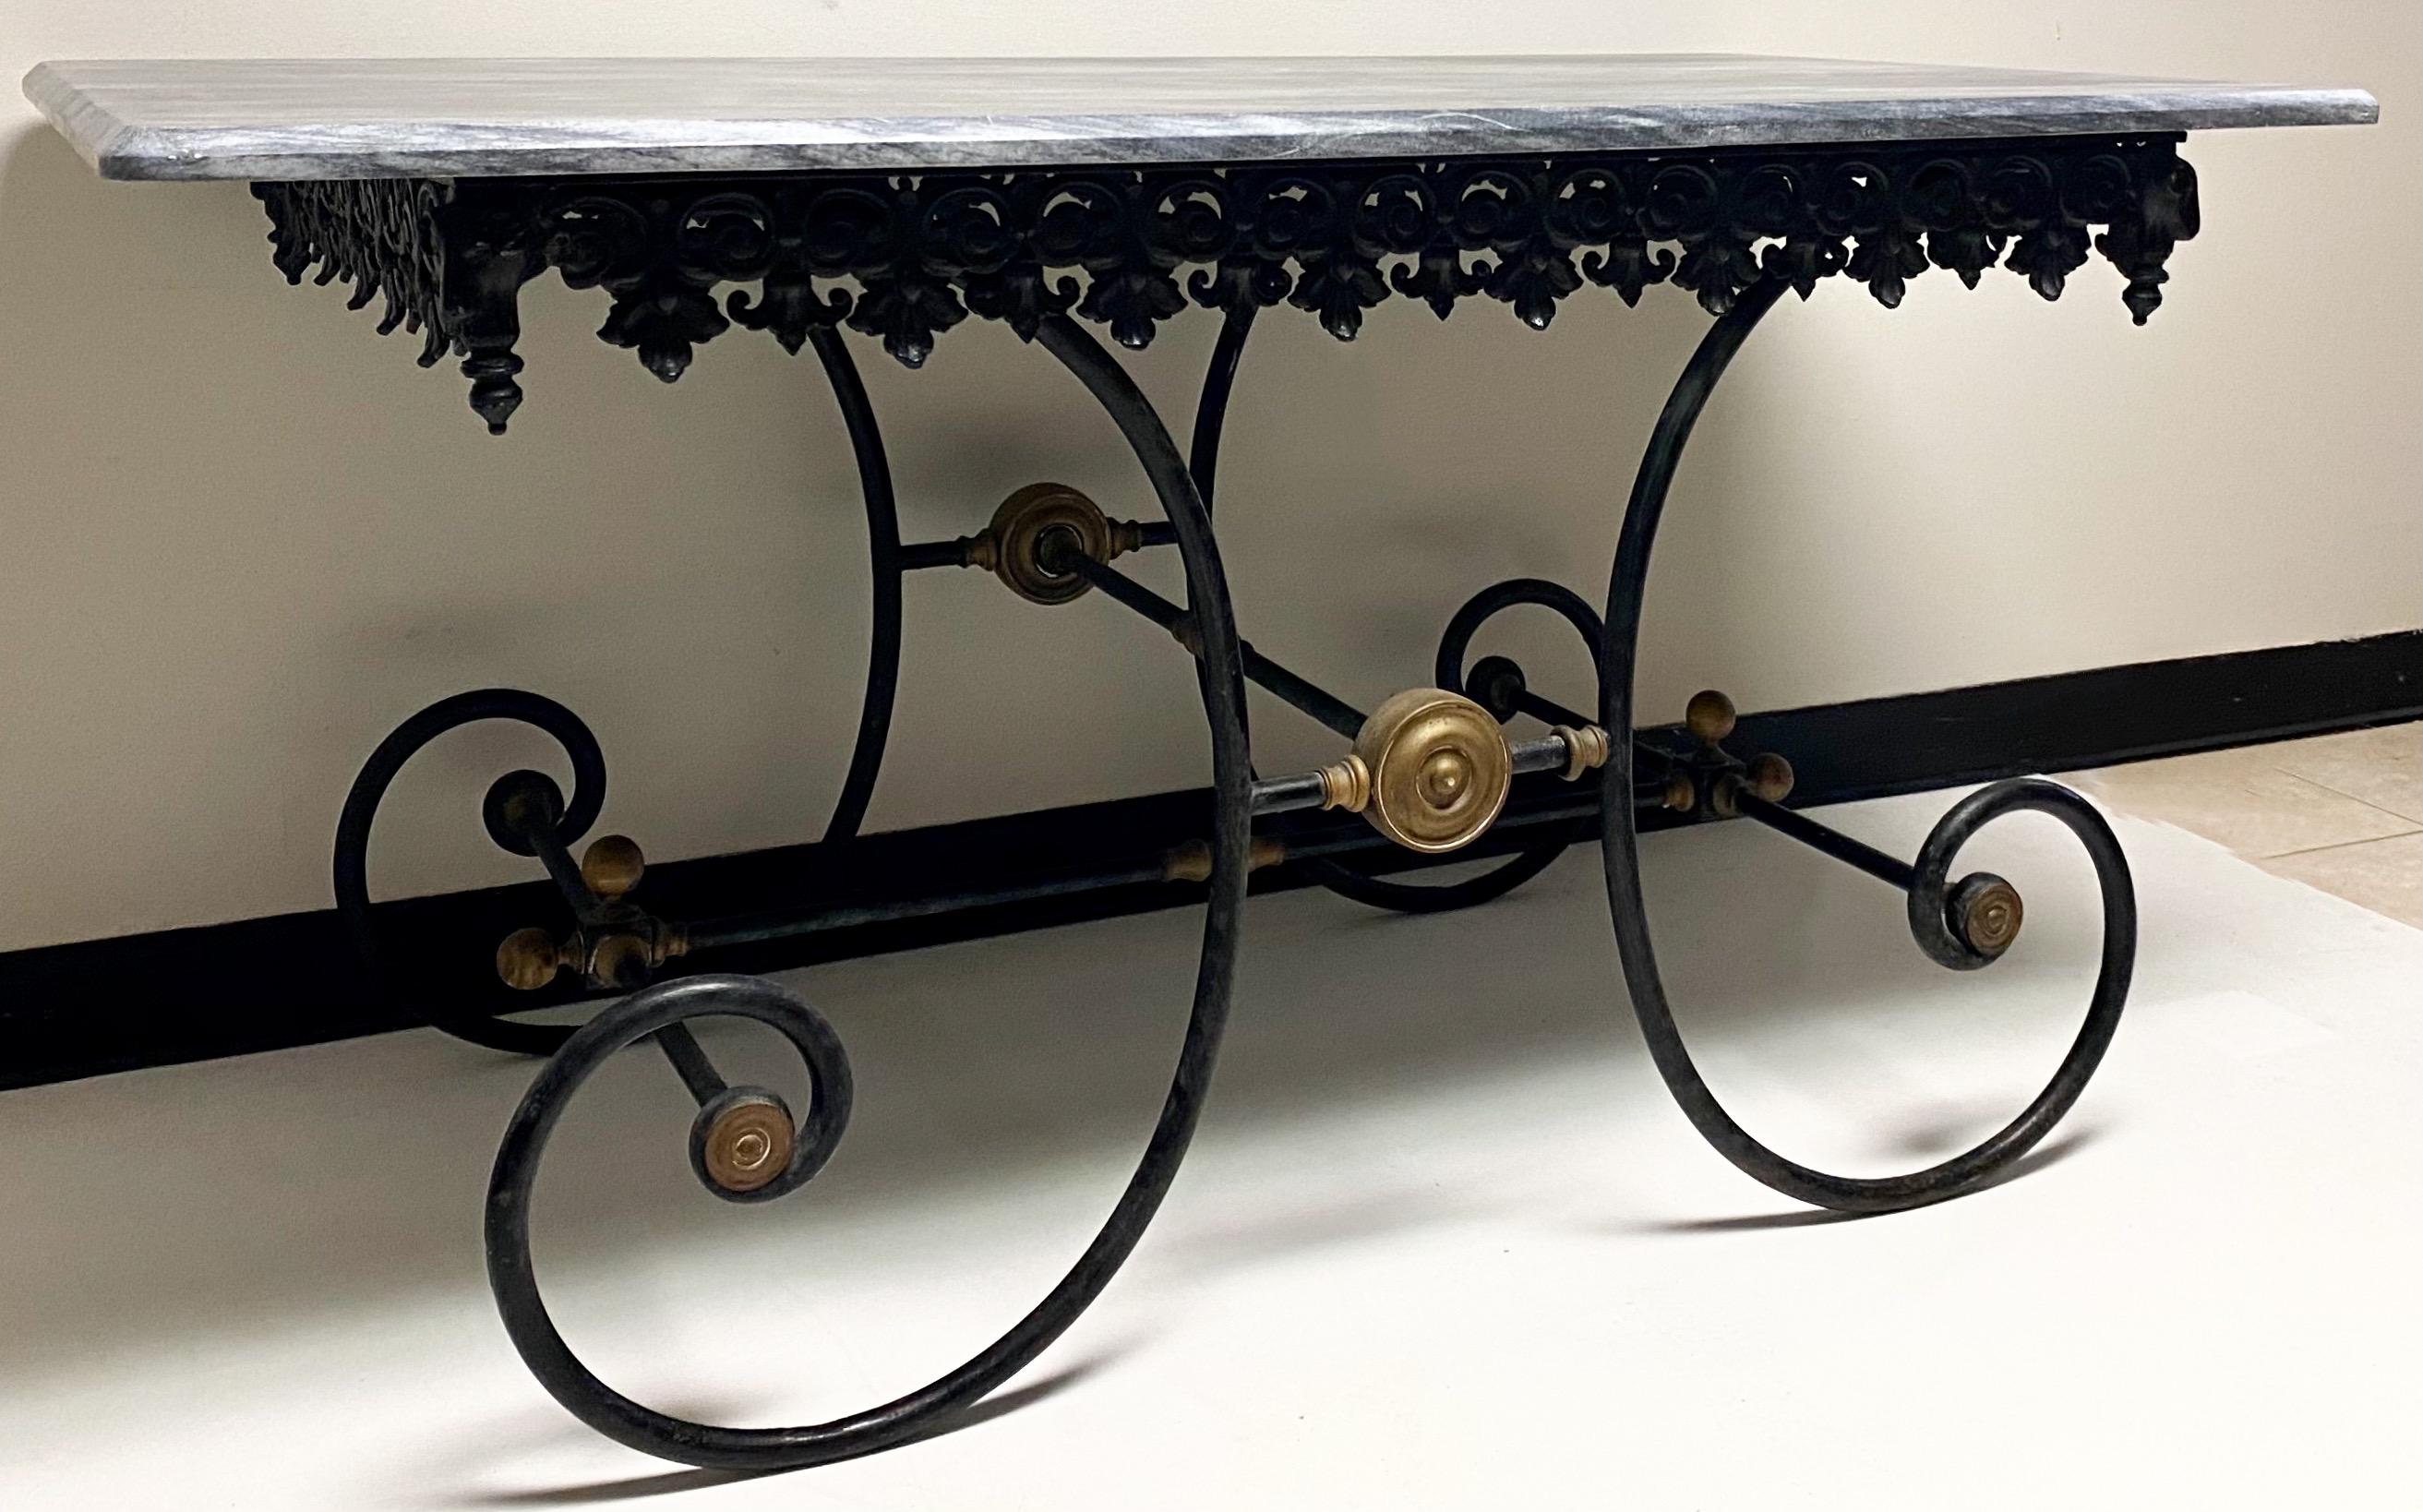 This is a 19th century French neoclassical cast iron and marble top baker’s table. The frame’s construction is a heavy cast iron and solid brass with ram’s heads on all four corners. The marble is most likely not original but is gray with white